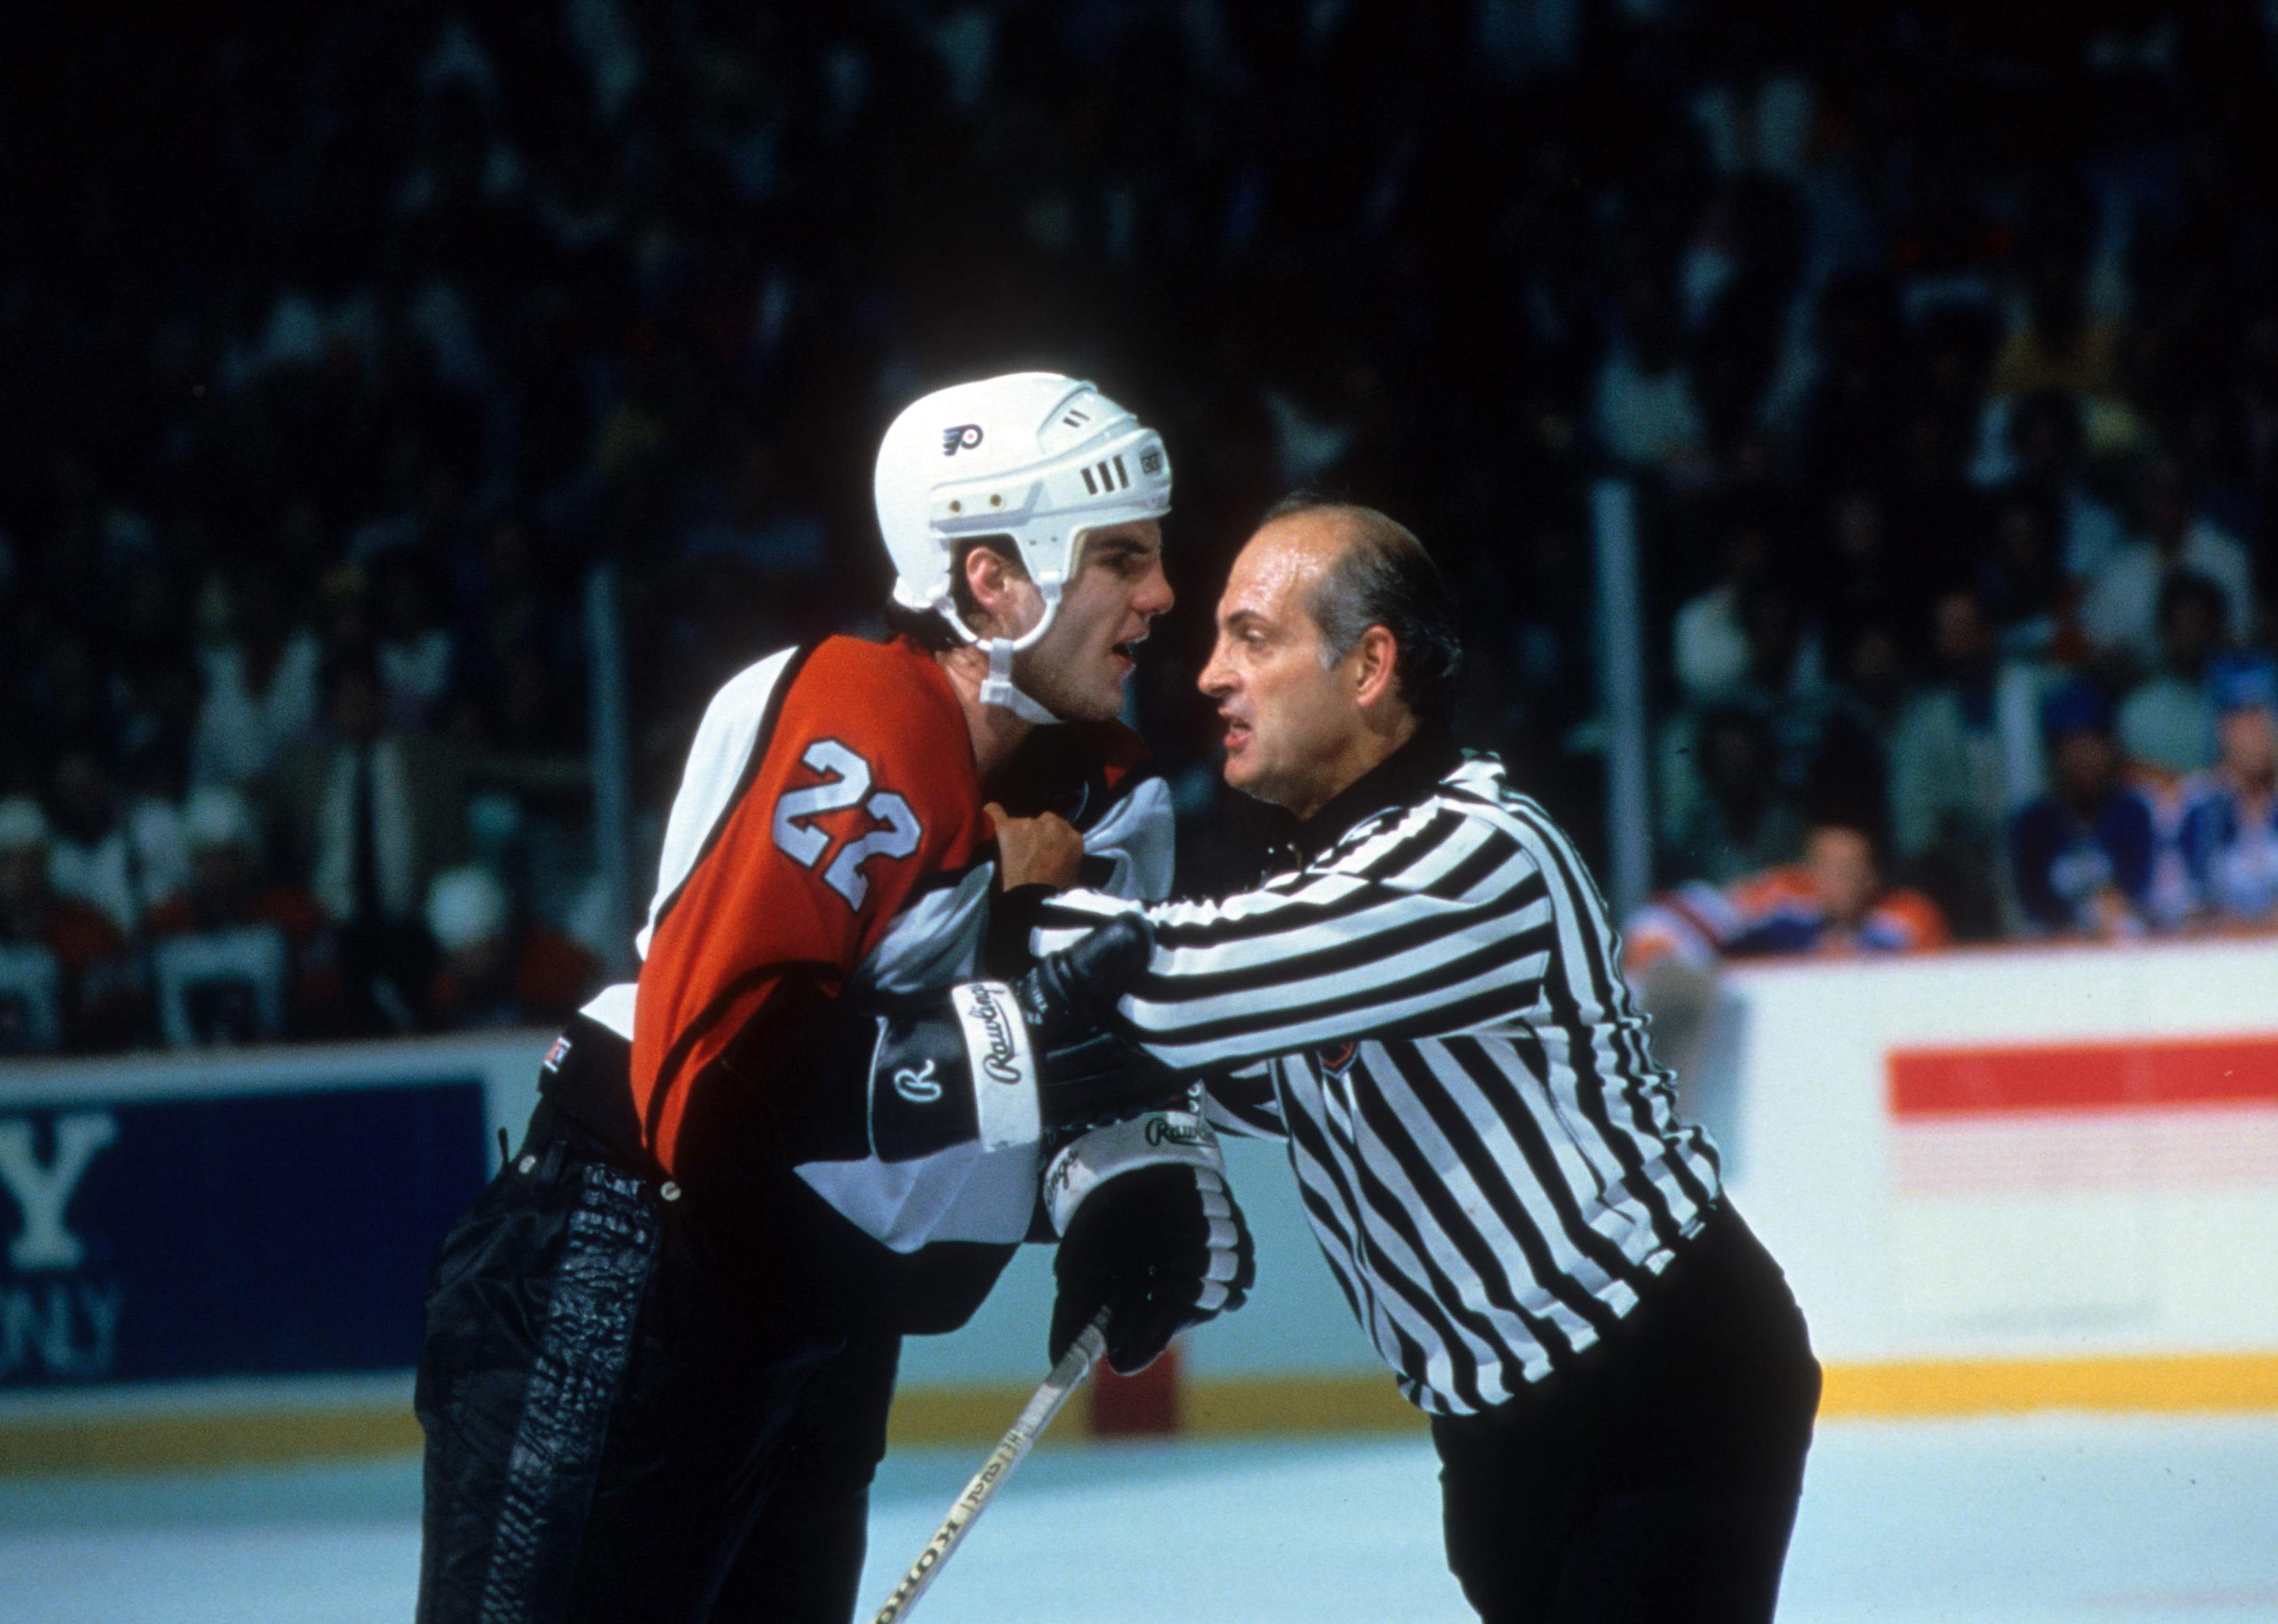 Rick Tocchet of the Philadelphia Flyers is restrained by a linesman/